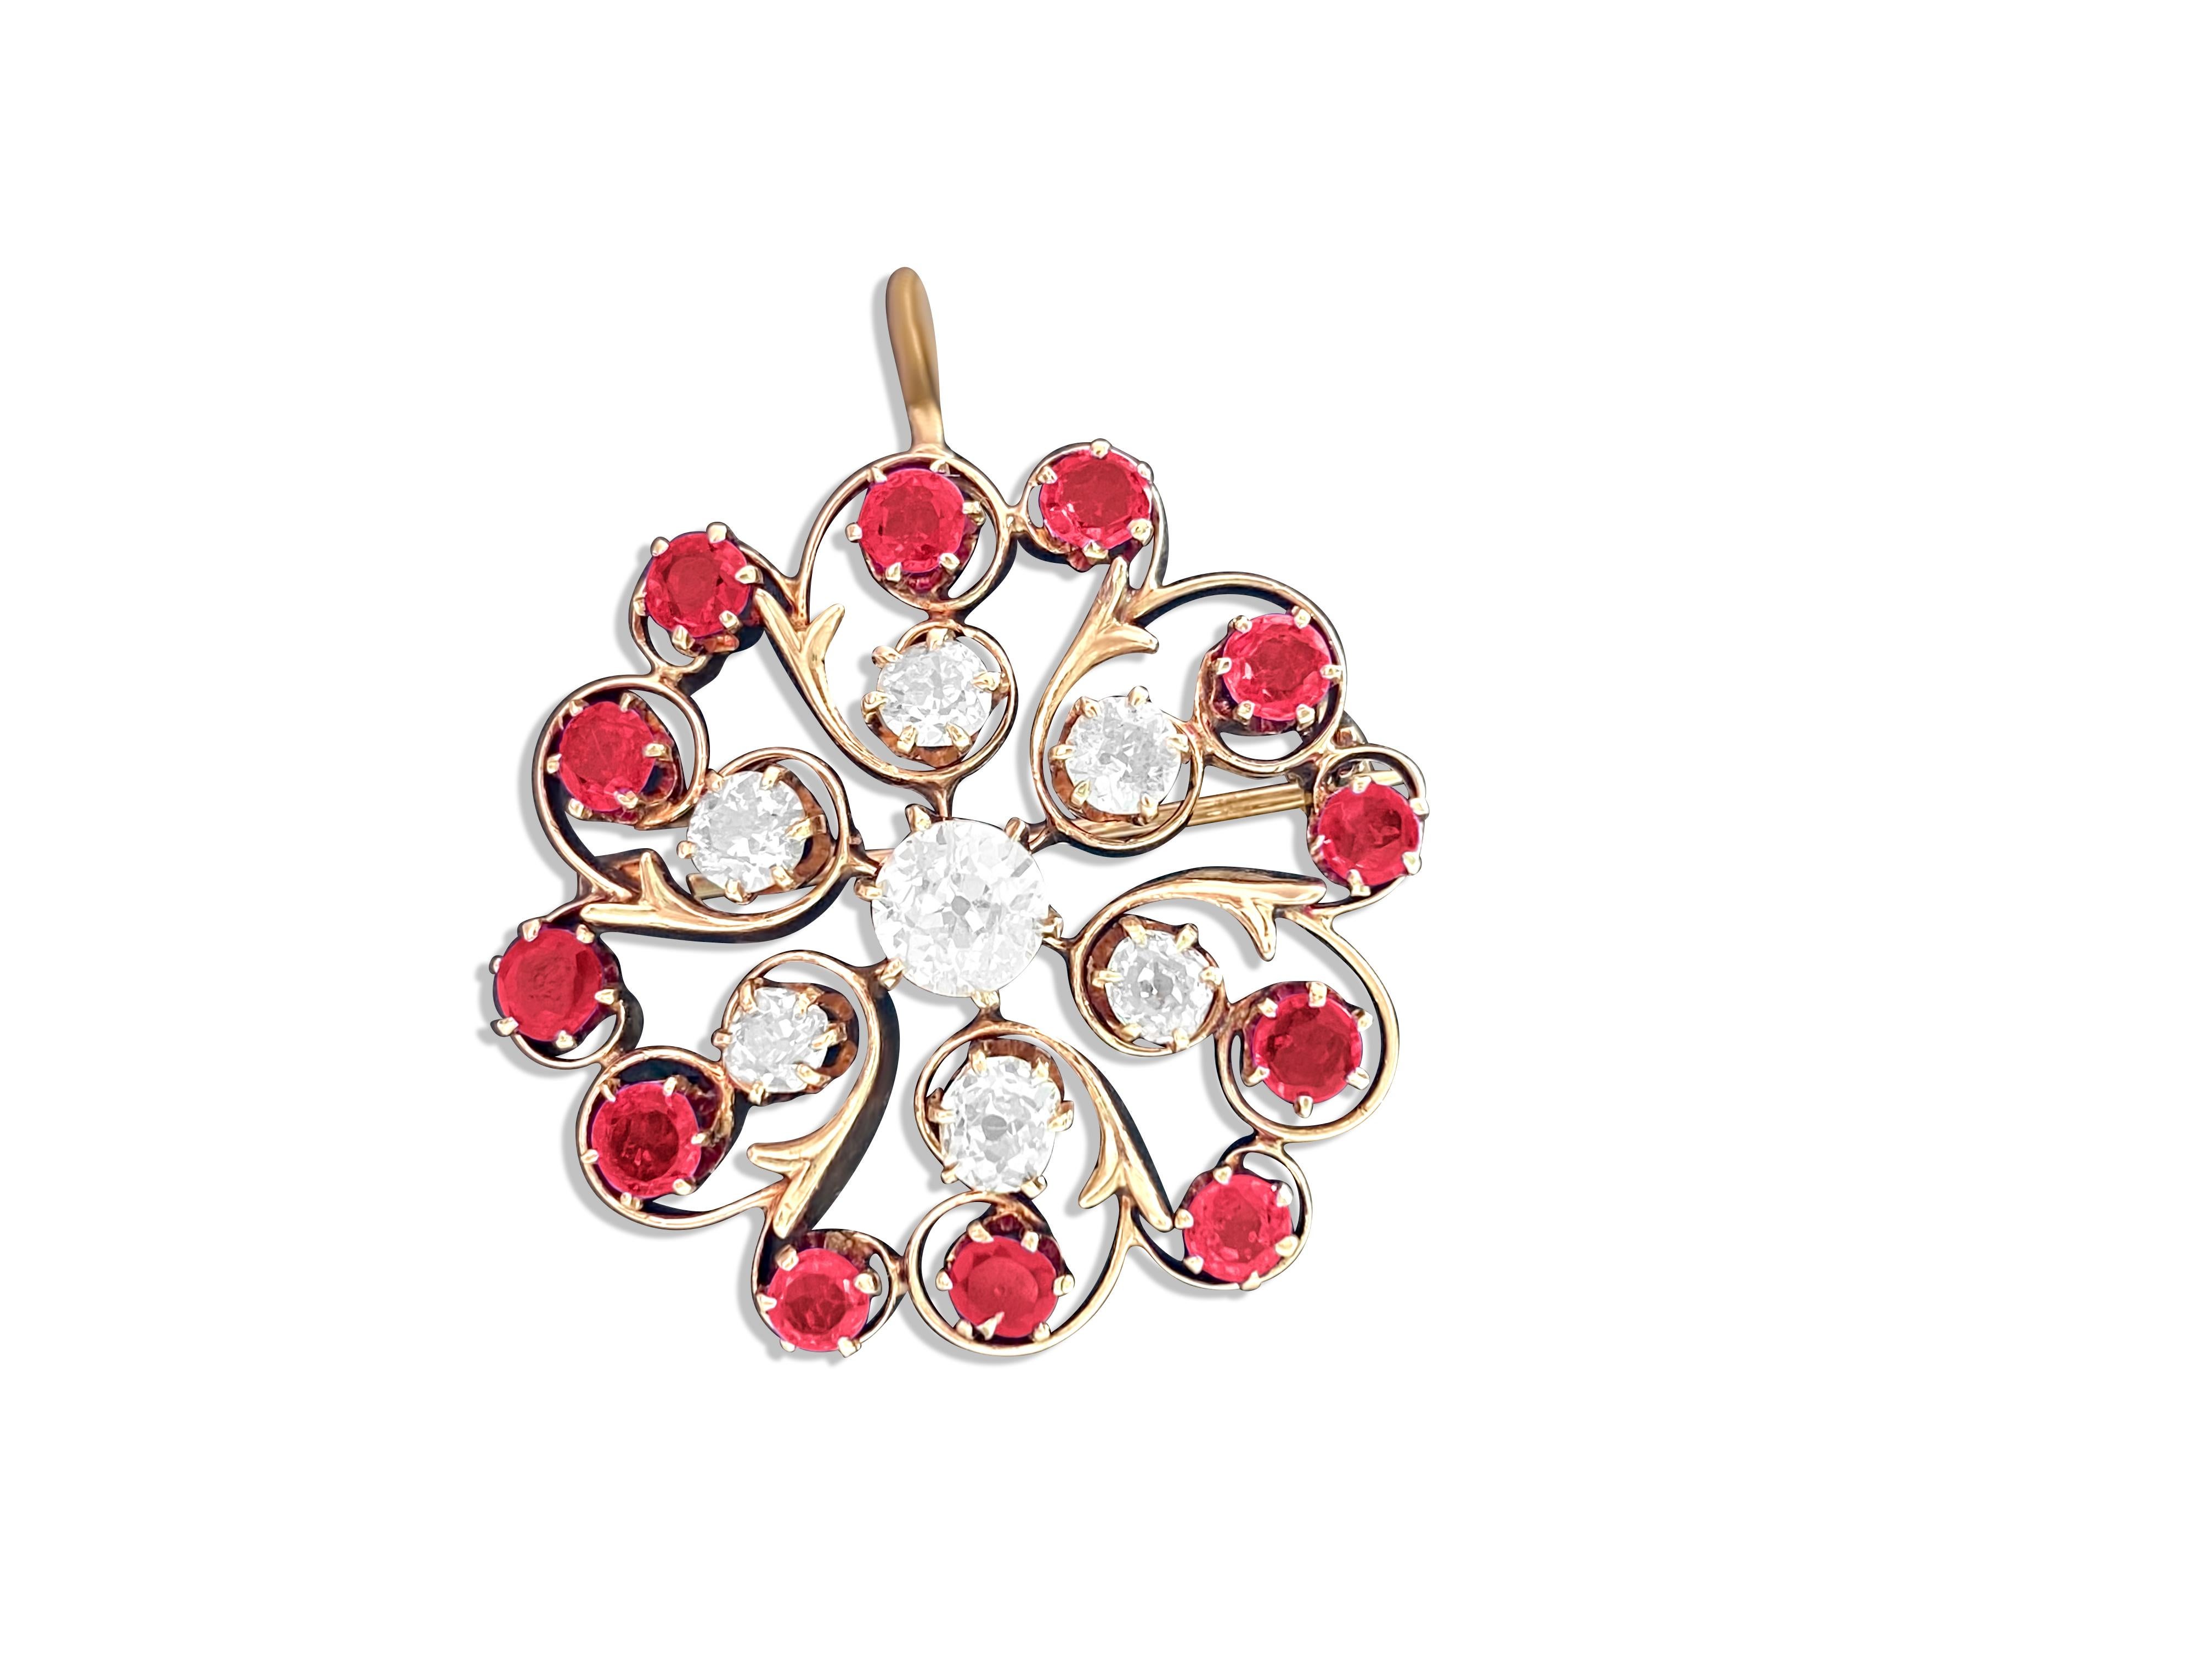 Antique European 3.70 Carat Diamond and Ruby Pin/Pendant 'GIA' In Excellent Condition For Sale In Miami, FL